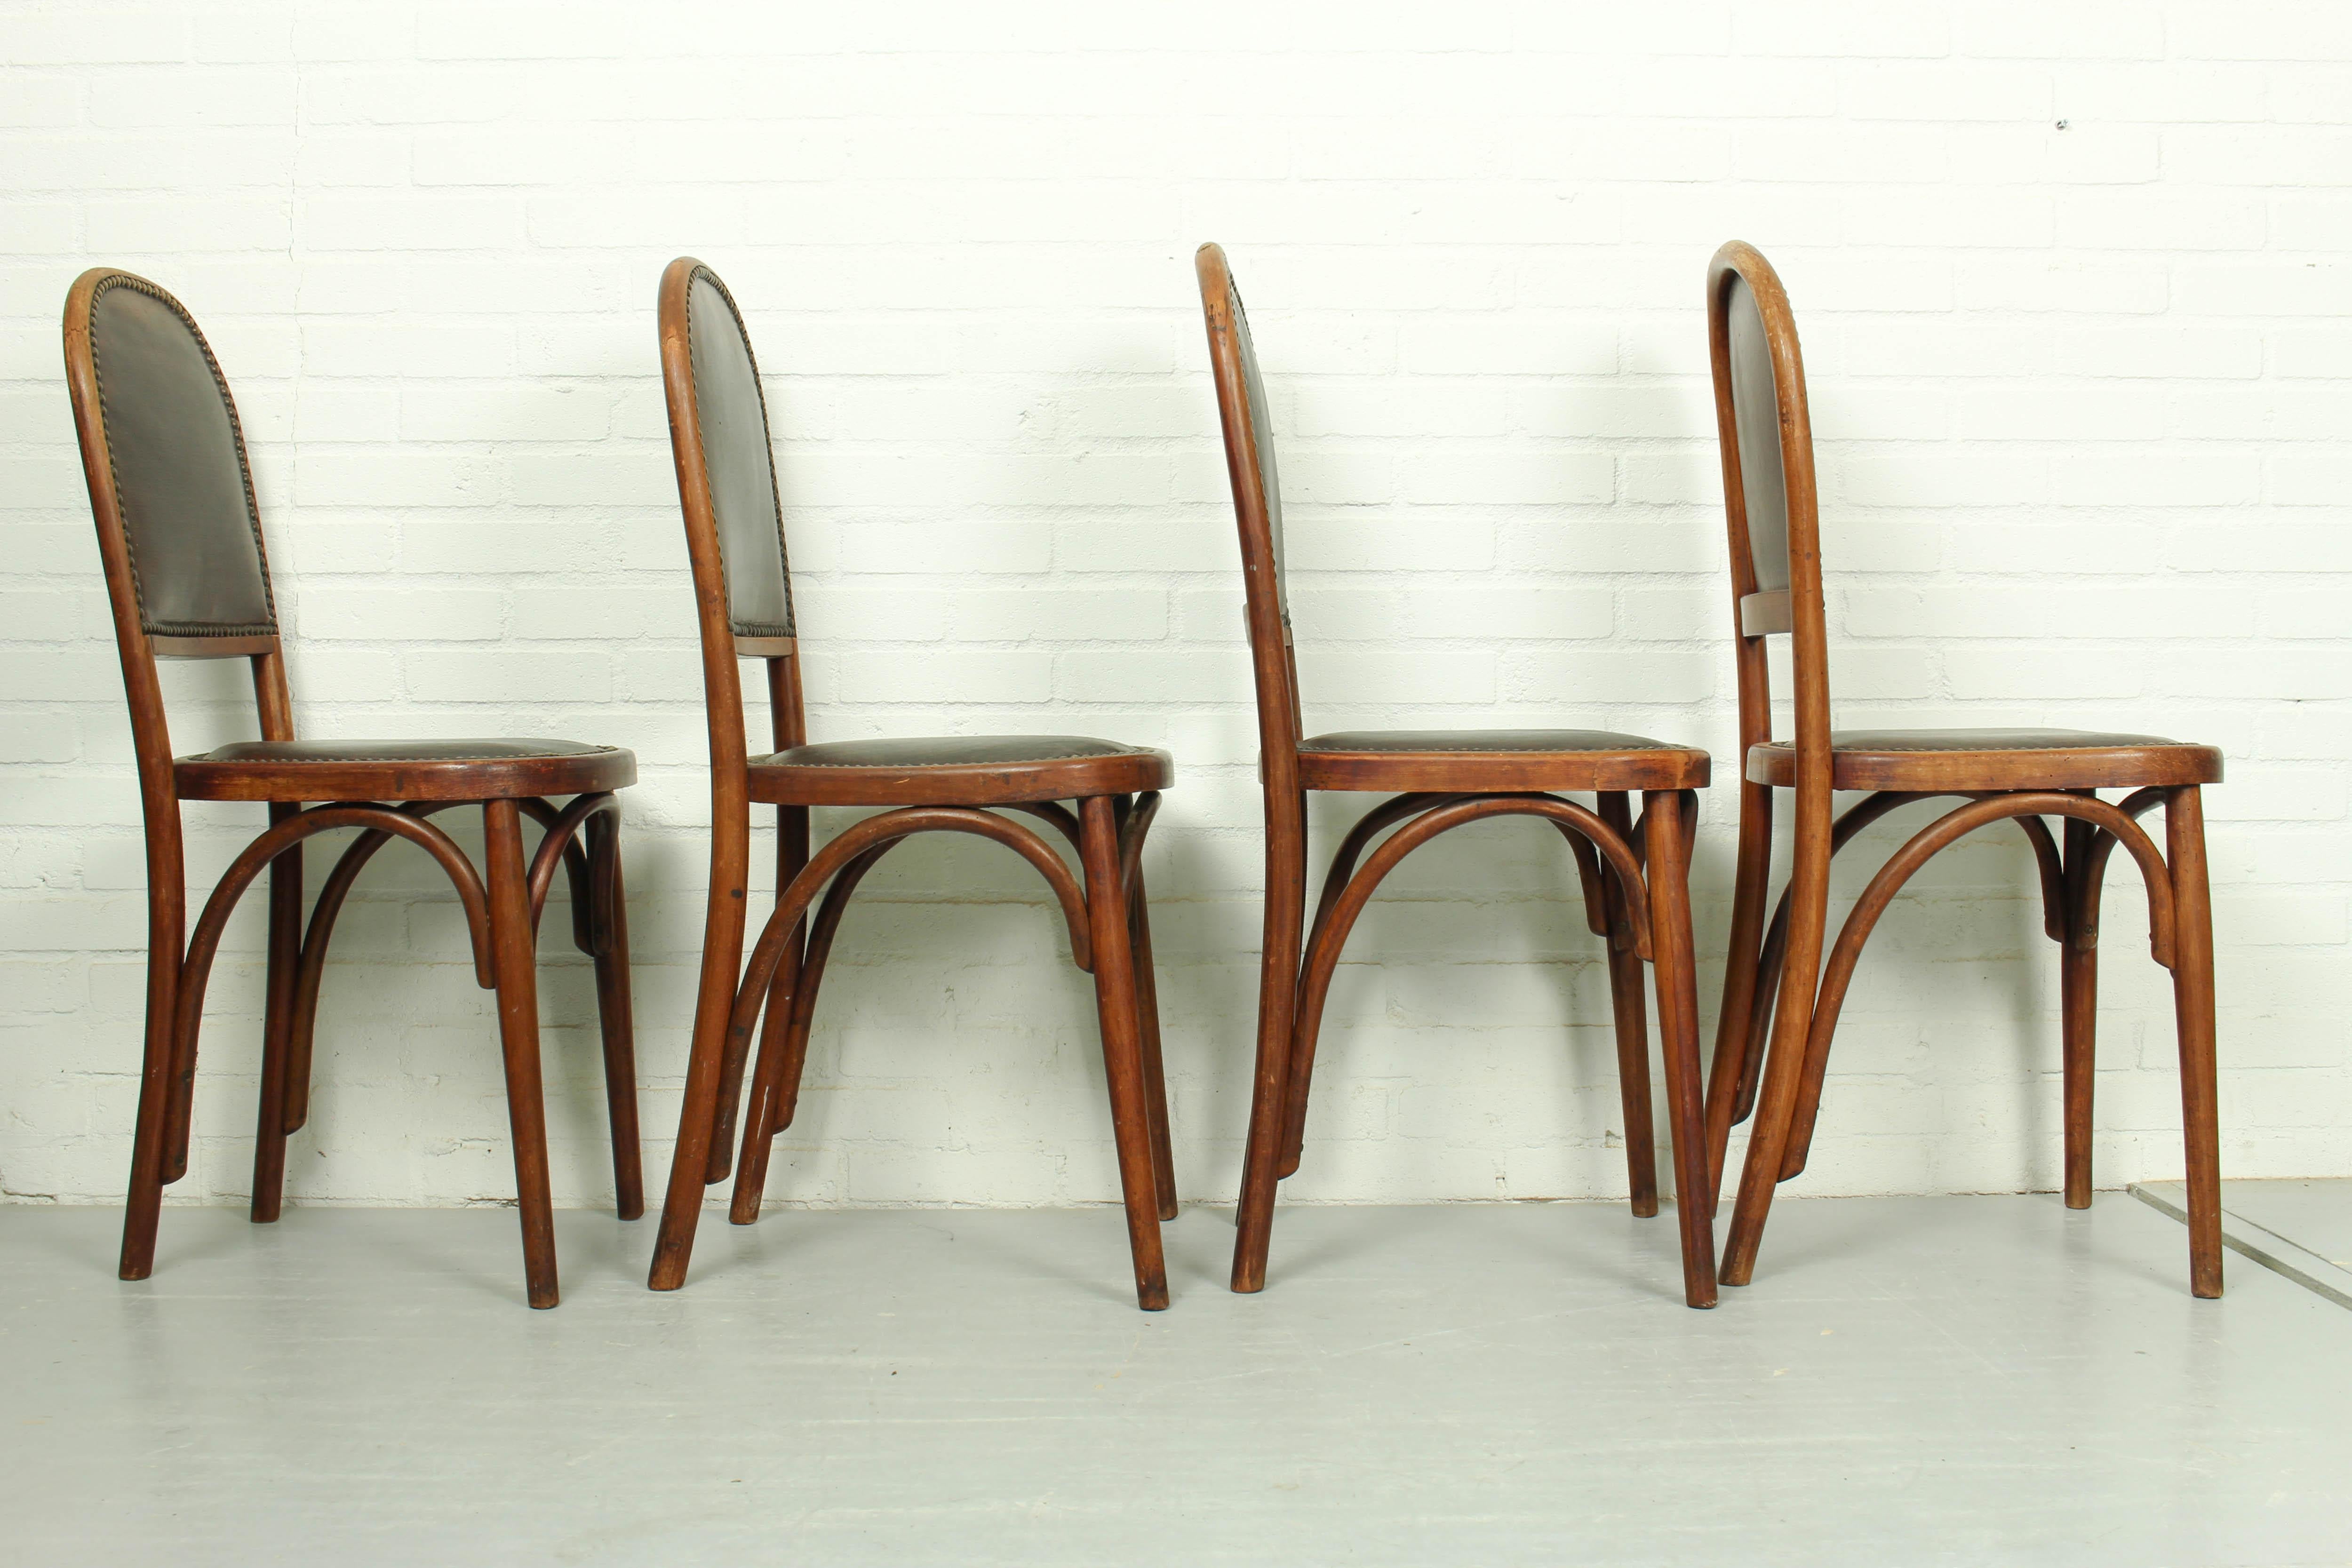 Czech  Art Nouveau Bentwood and Leather Dining Room Set from Fischel, c1910 For Sale